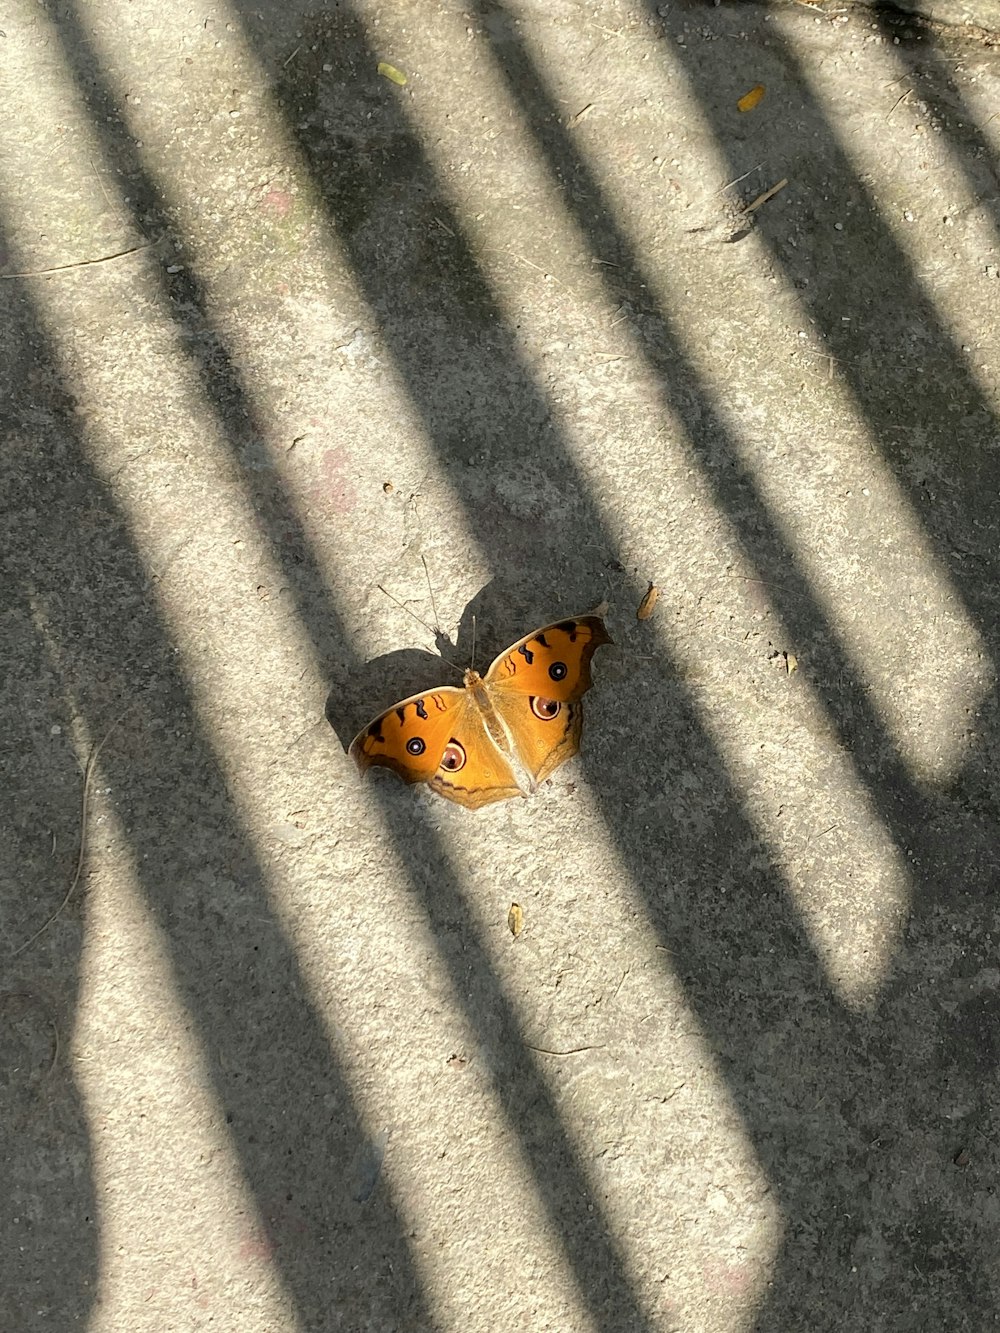 a butterfly sitting on the ground in the sun